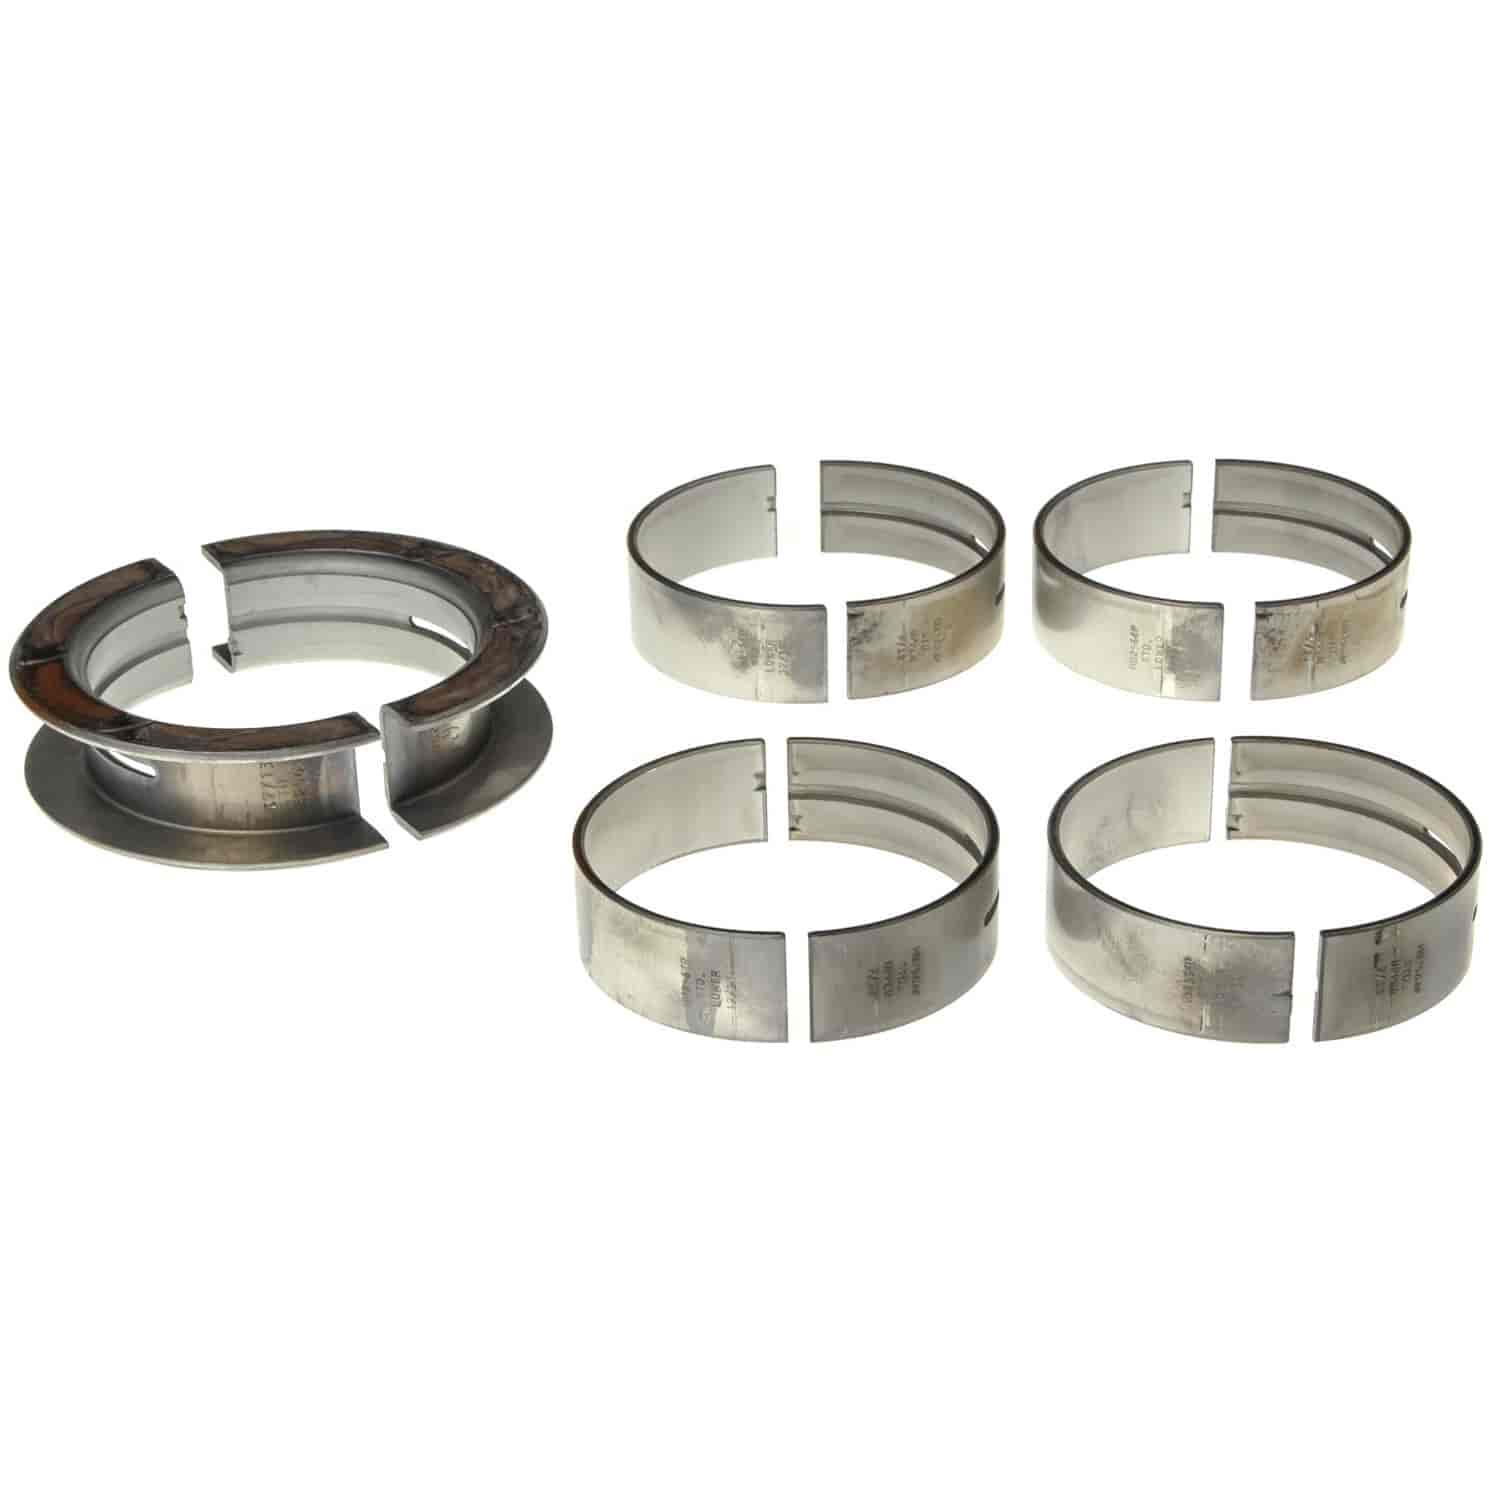 Main Bearing Set Ford 1968-1997 V8 370/429/460 (6.1/7.0/7.5L) with -.001" Undersize